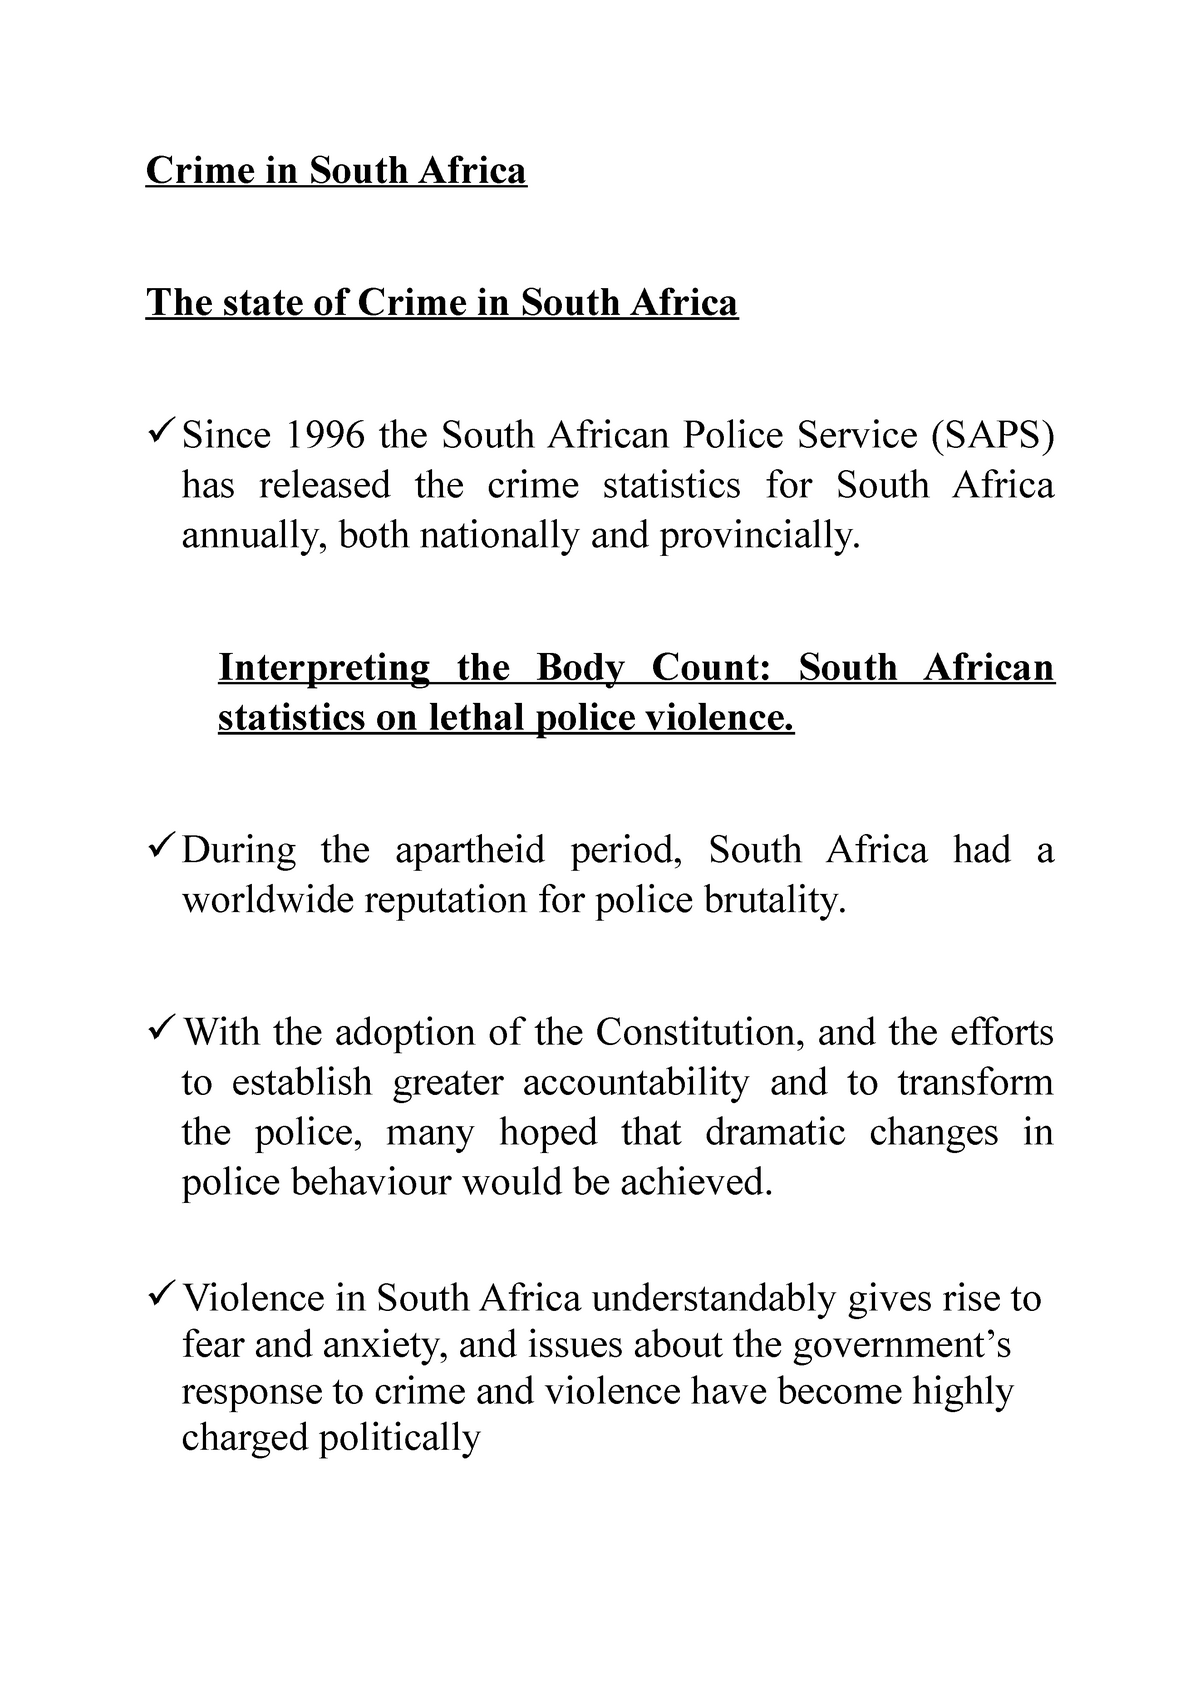 causes of crime in south africa essay